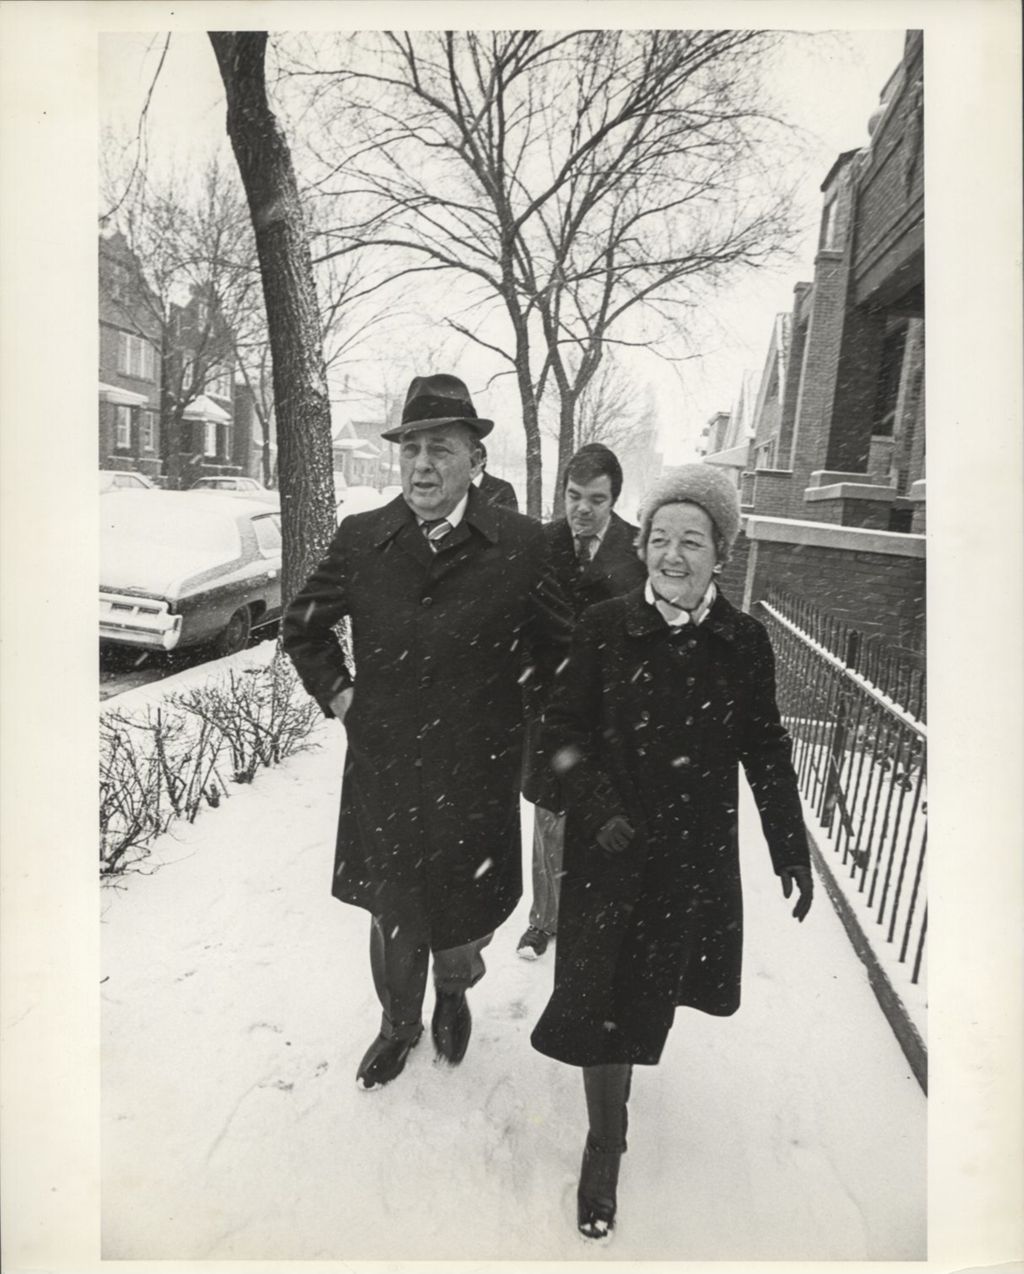 Miniature of Richard J. Daley and Eleanor Daley walking to the polling place